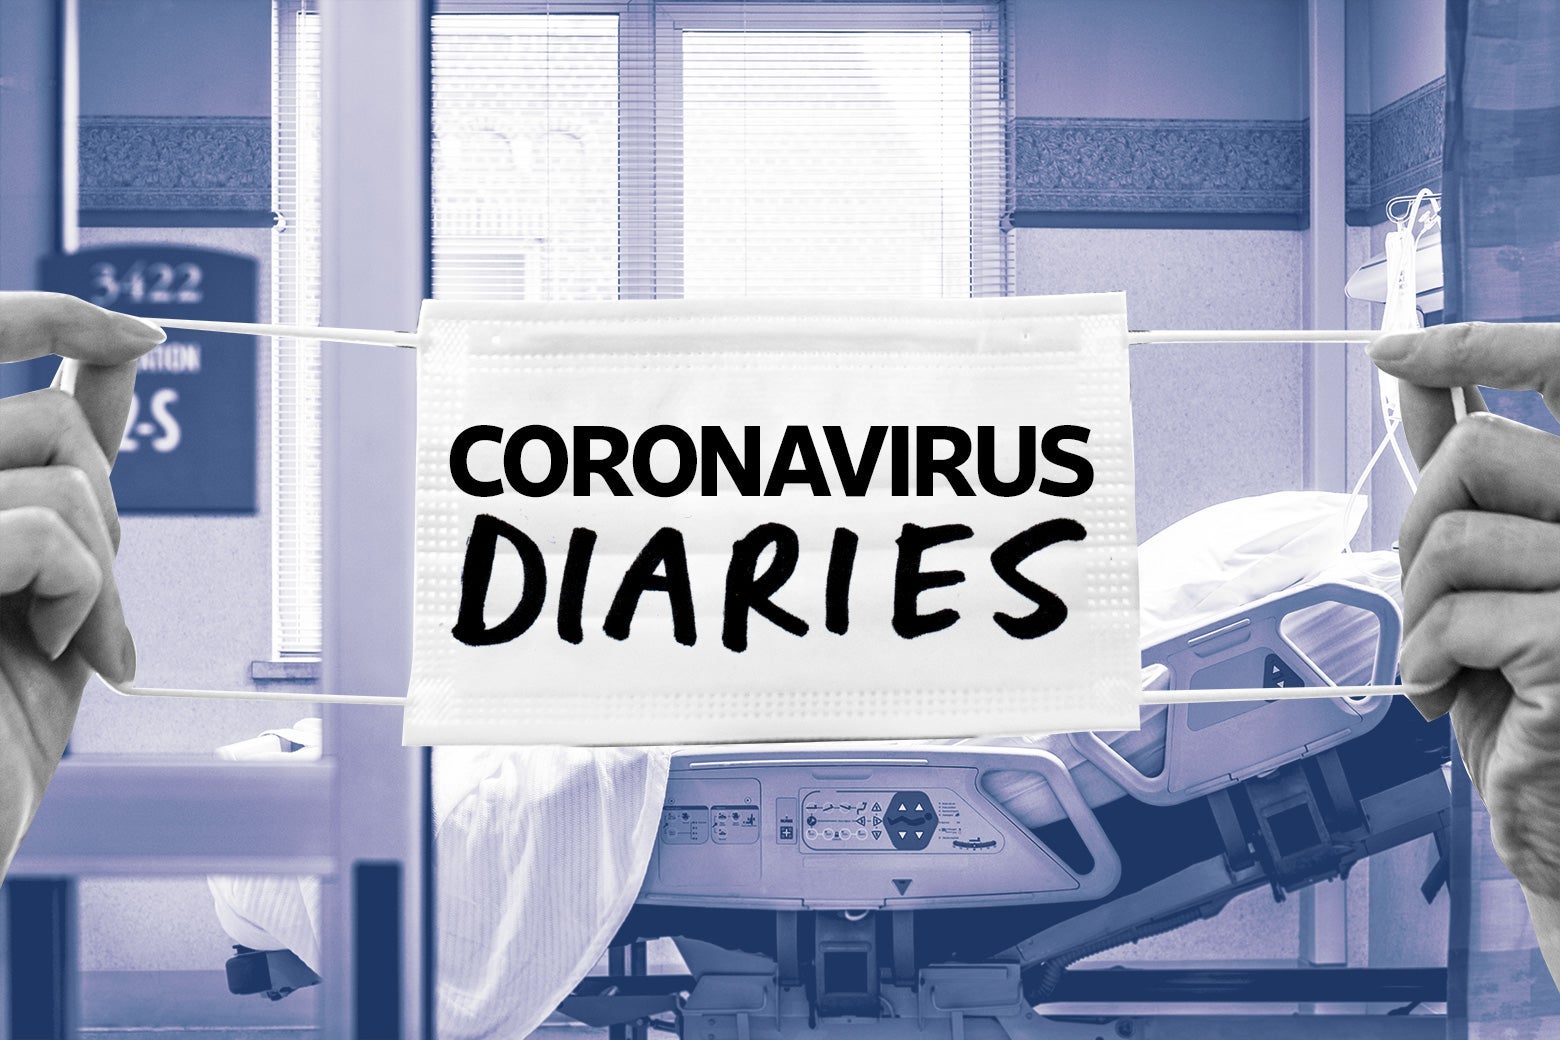 A mask that says "coronavirus diaries" overlaid on an image of an empty hospital room.